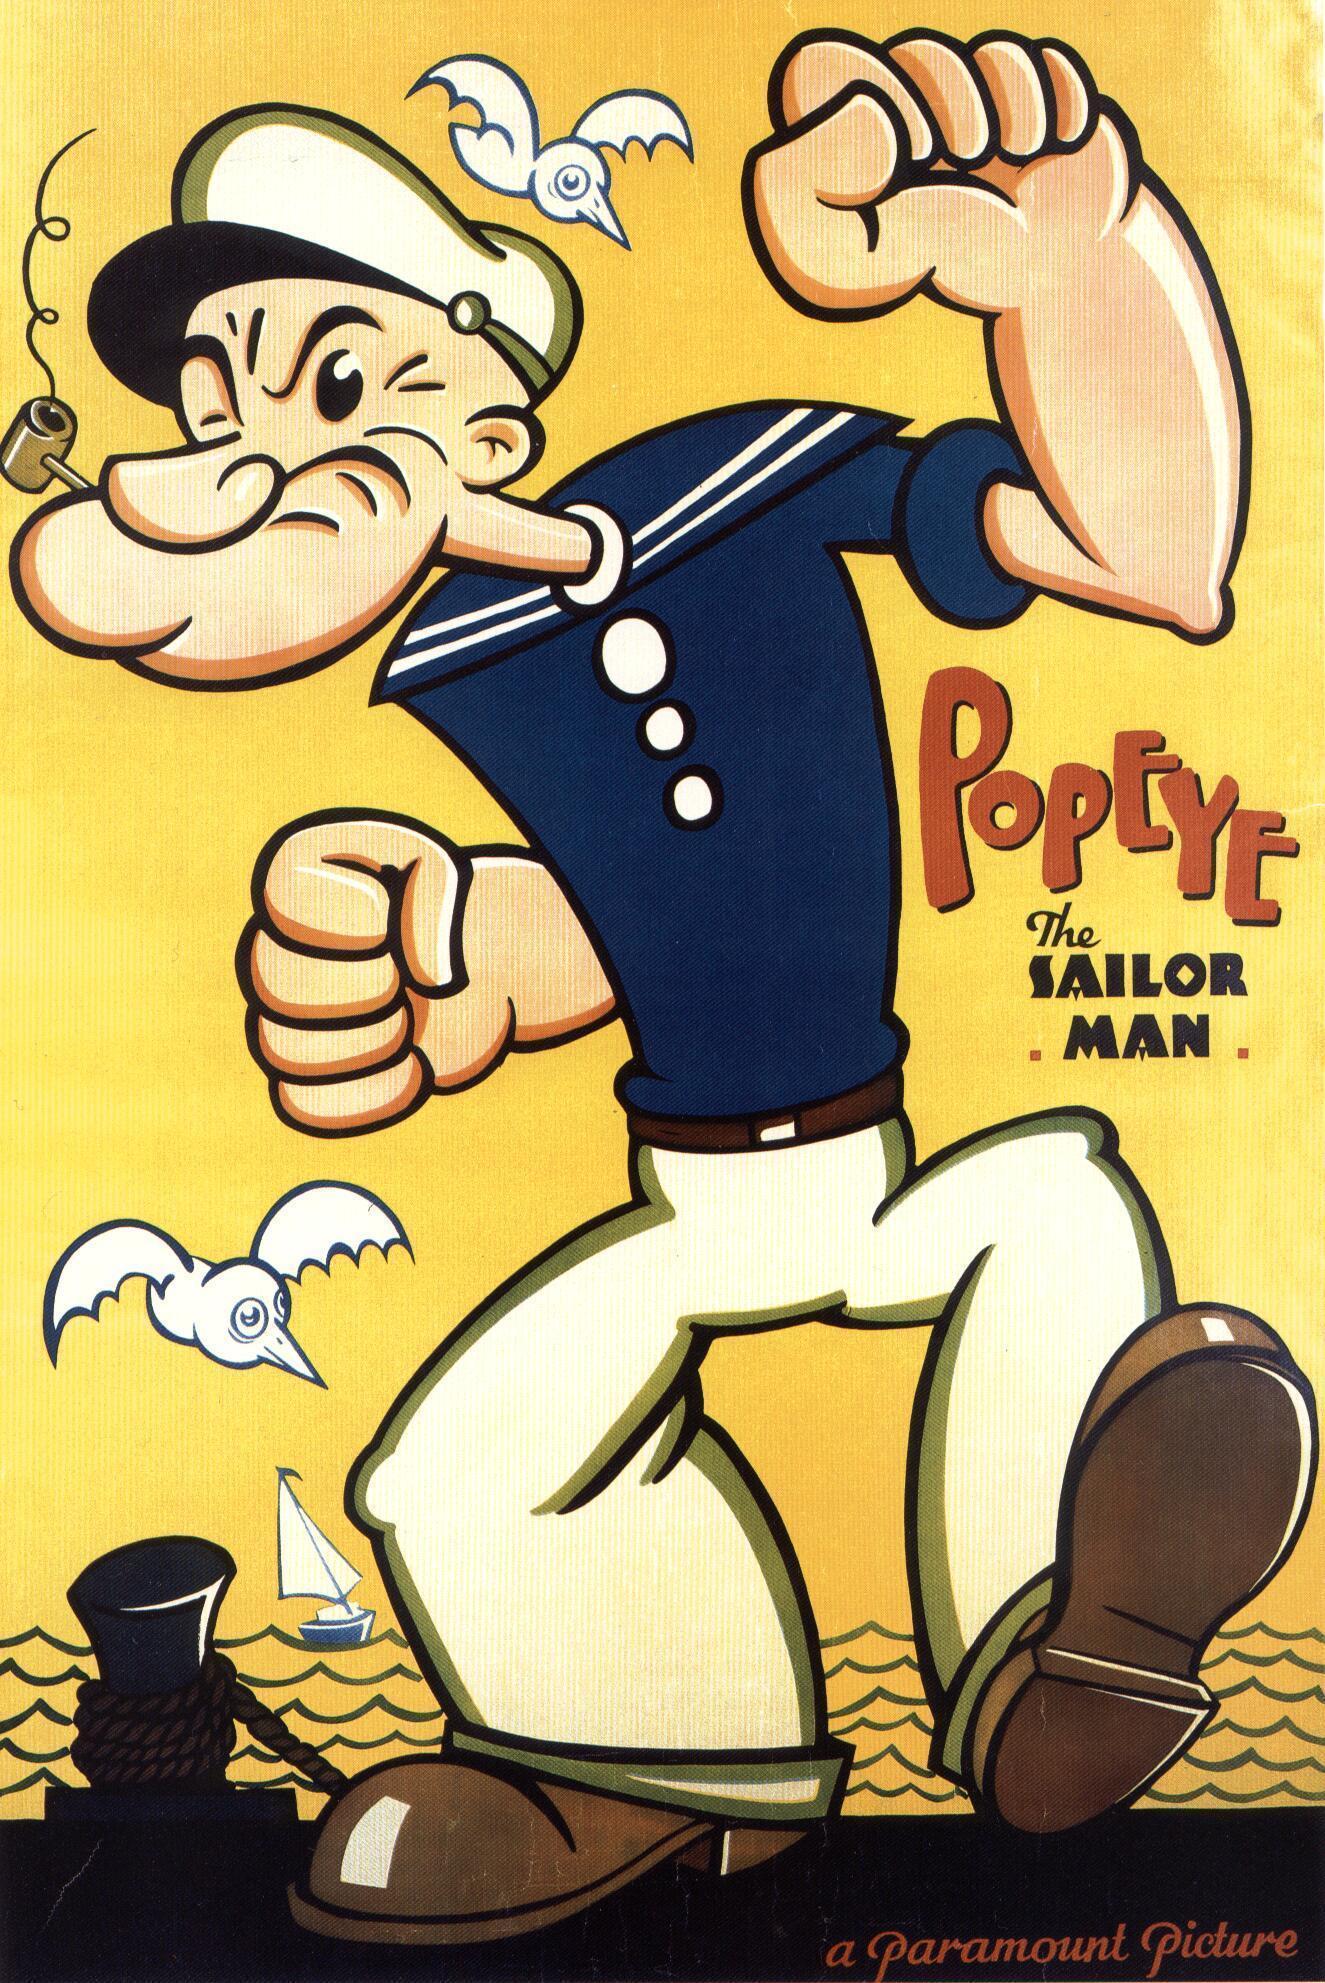 Popeye the Sailor Man HD Image Wallpaper for Android